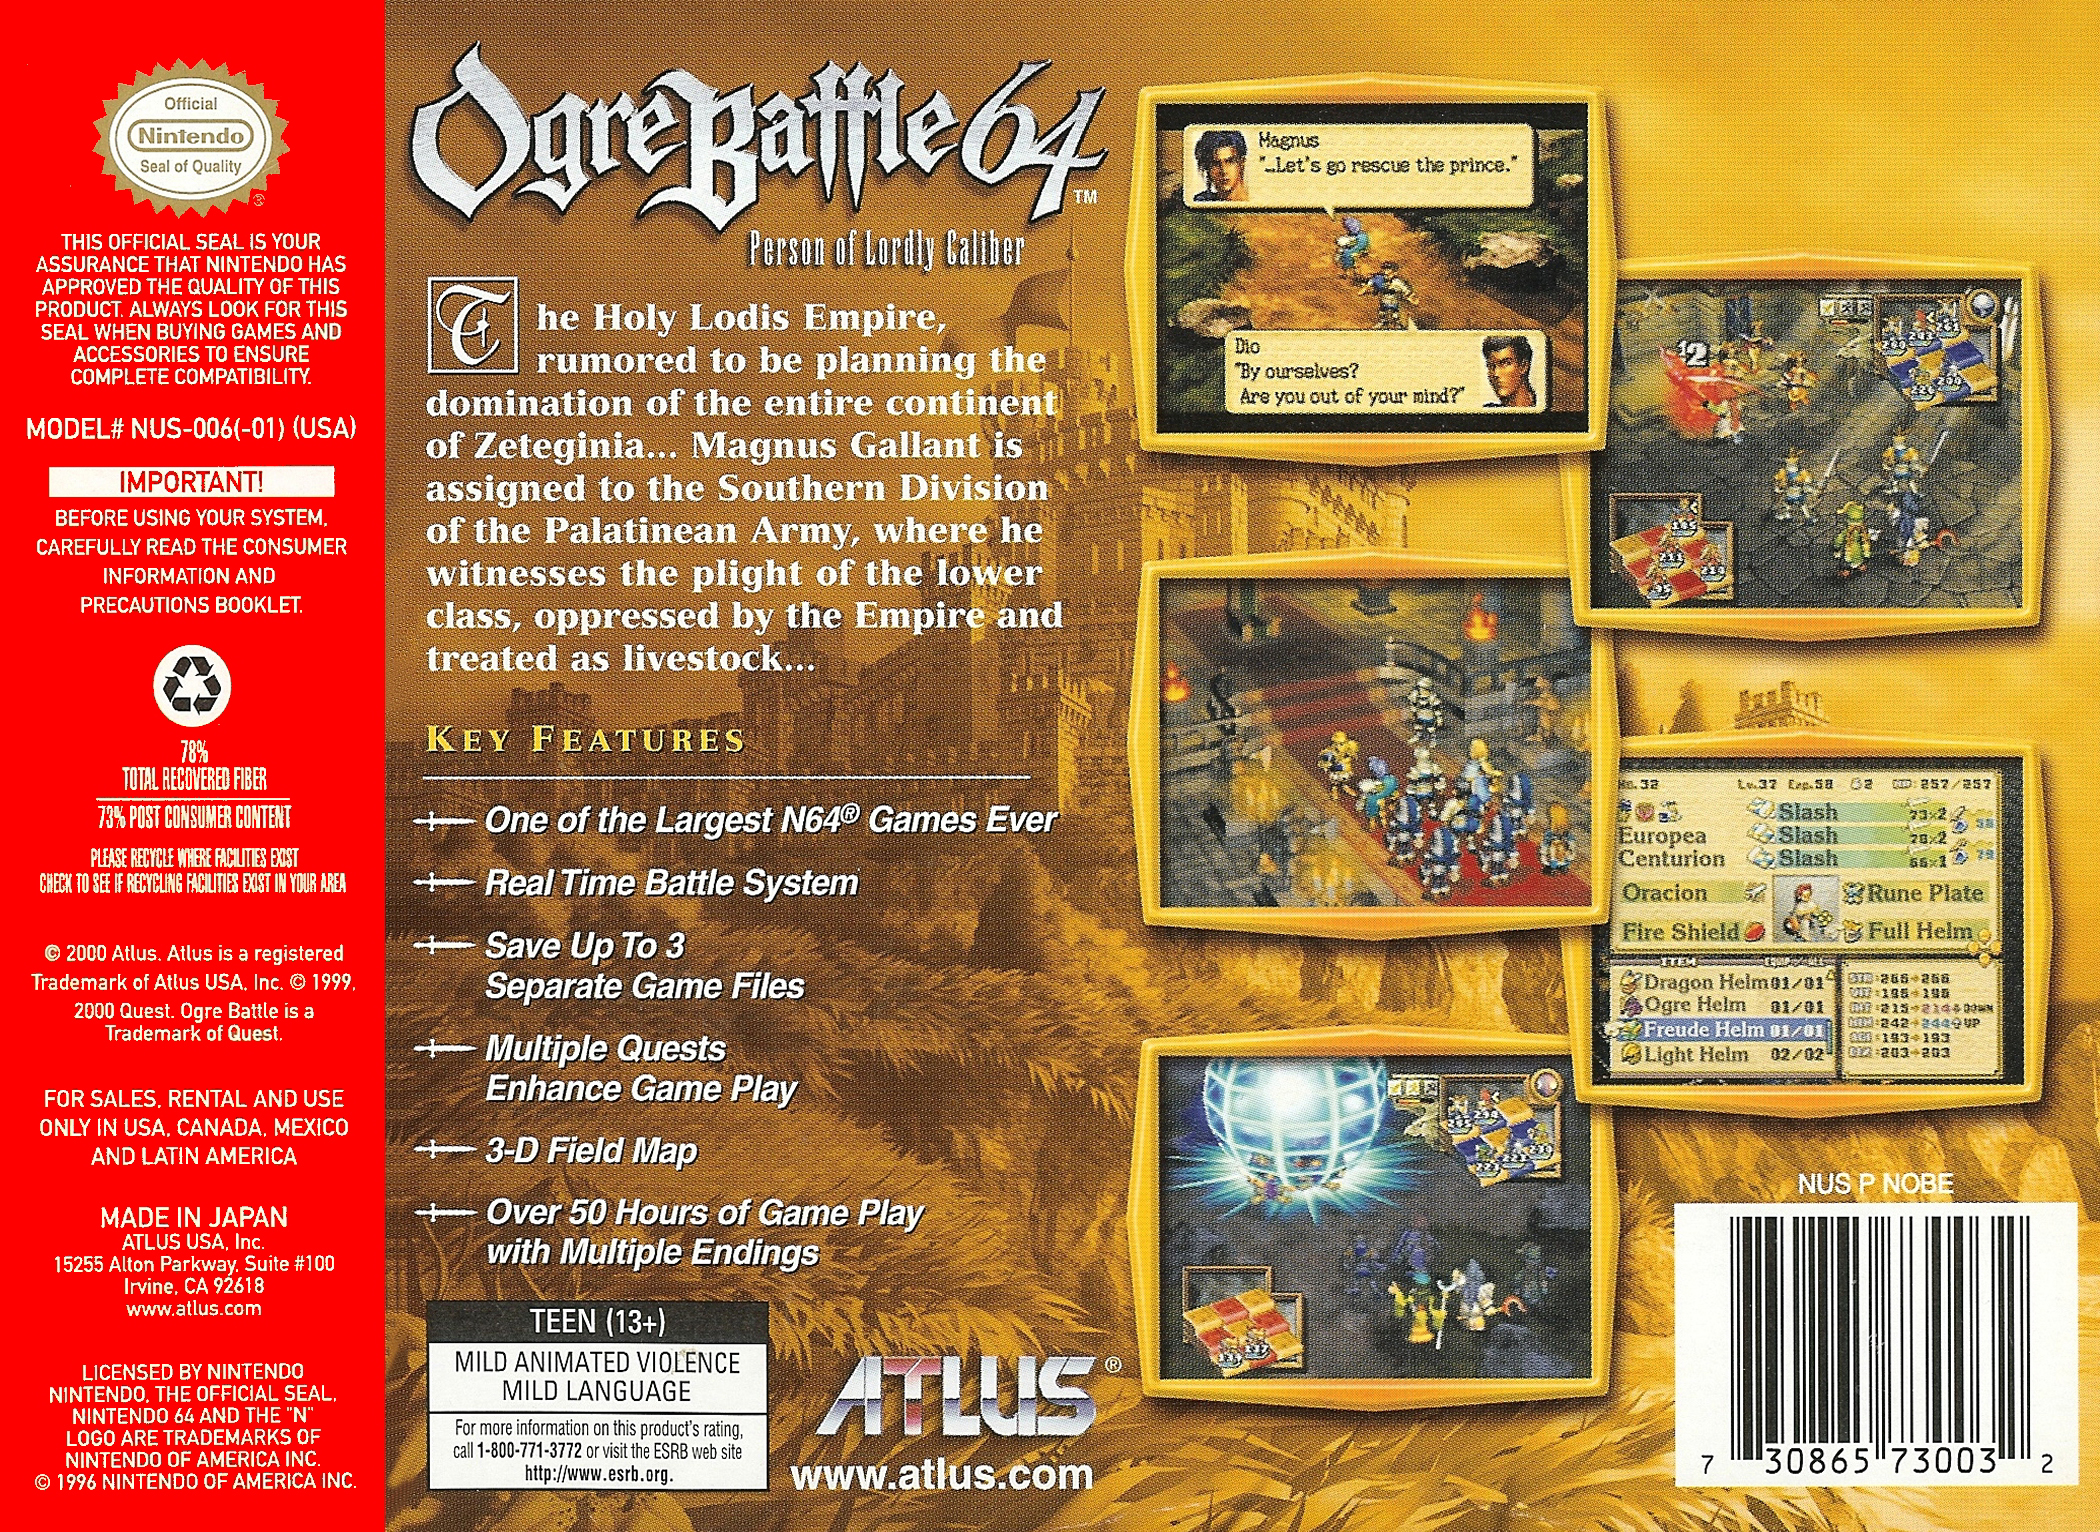 Ogre Battle 64: Person of Lordly Caliber Picture